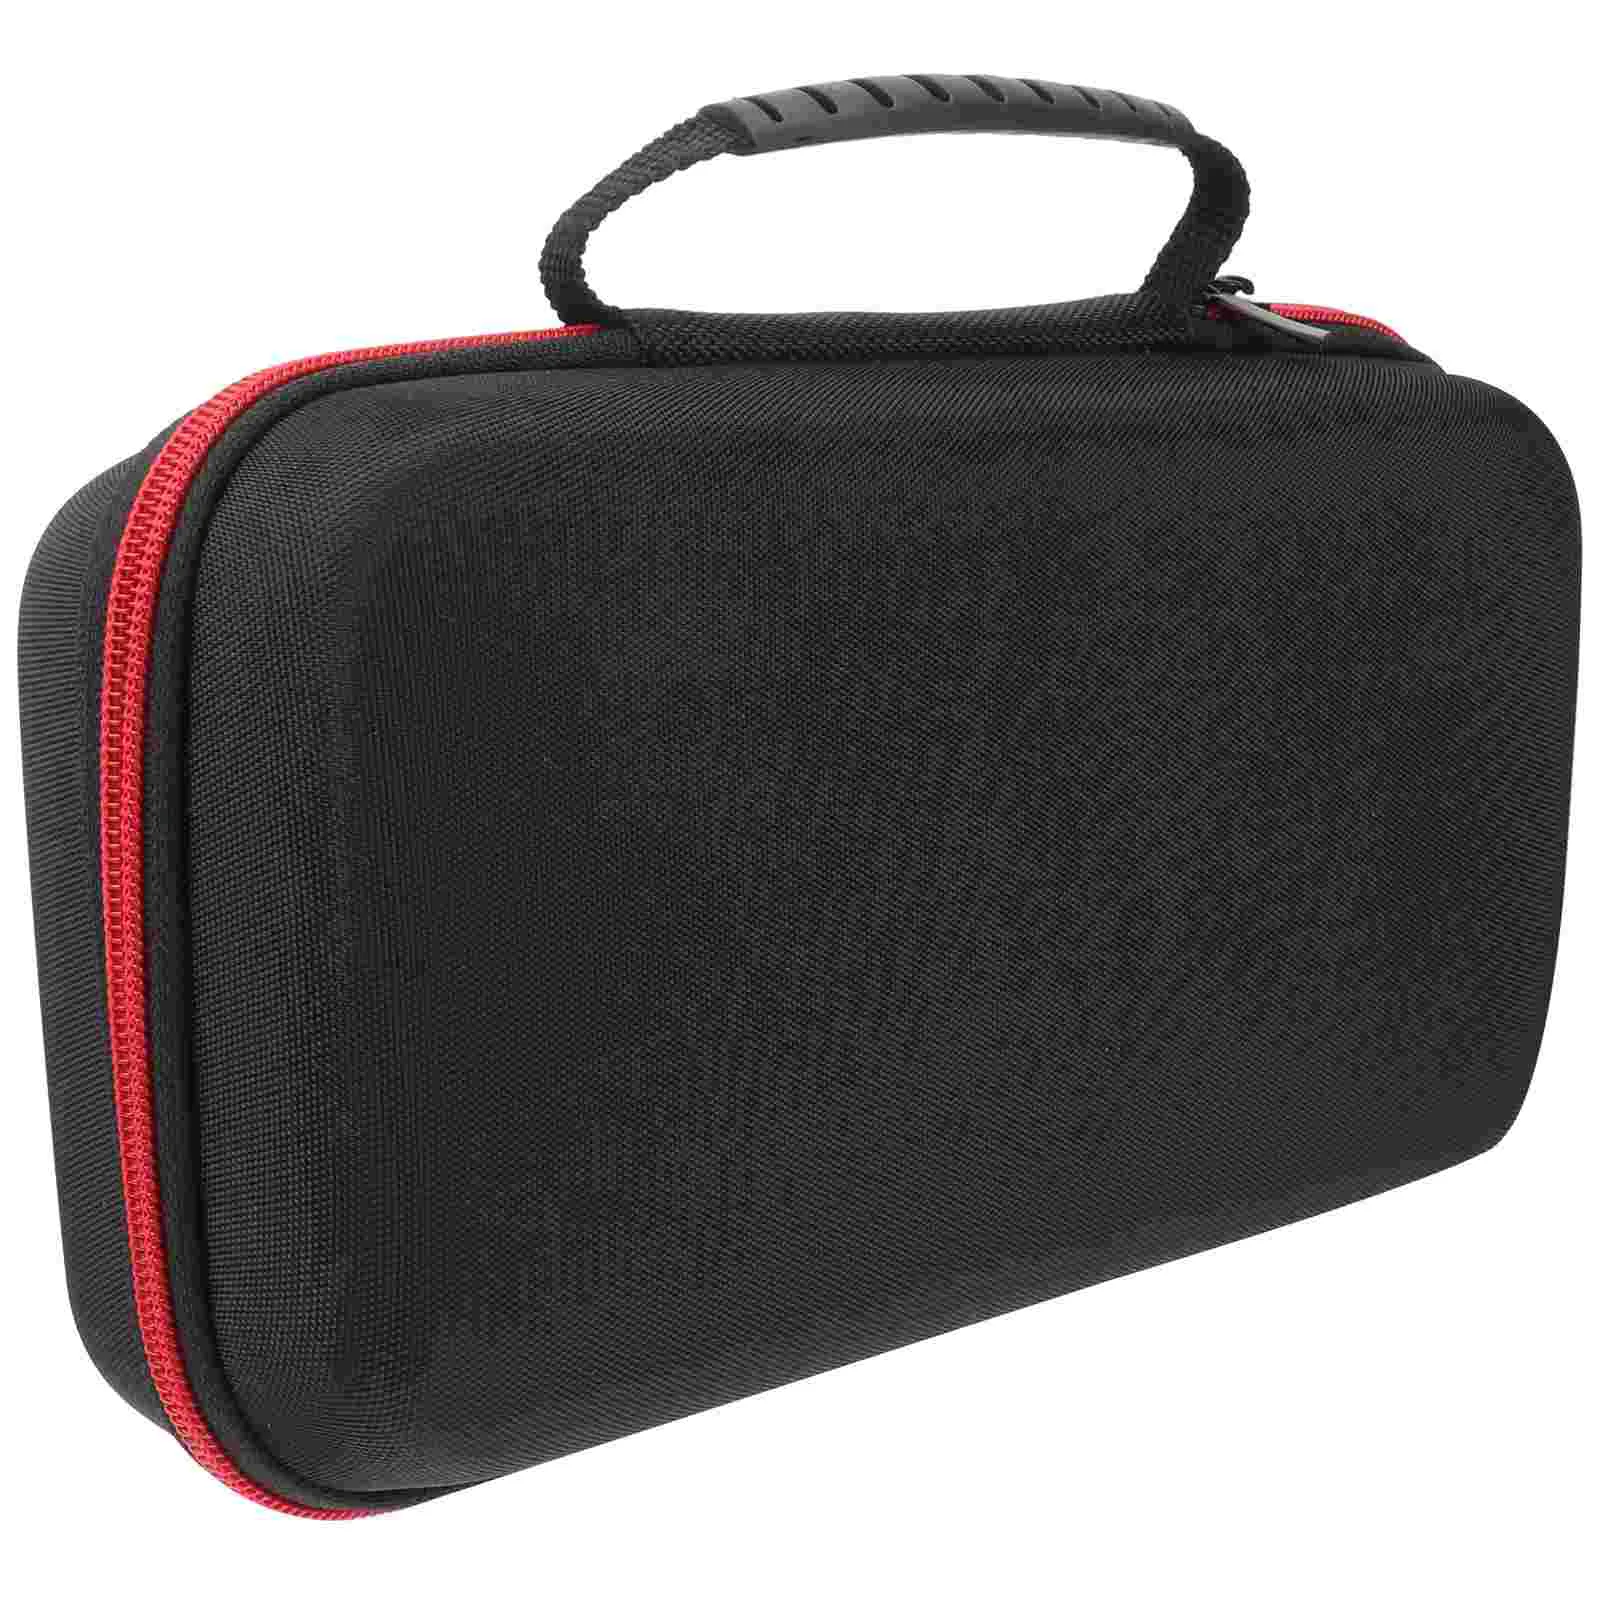 

Keyboard Case Carrying Storage Protector Box Illuminated Holder Container Black